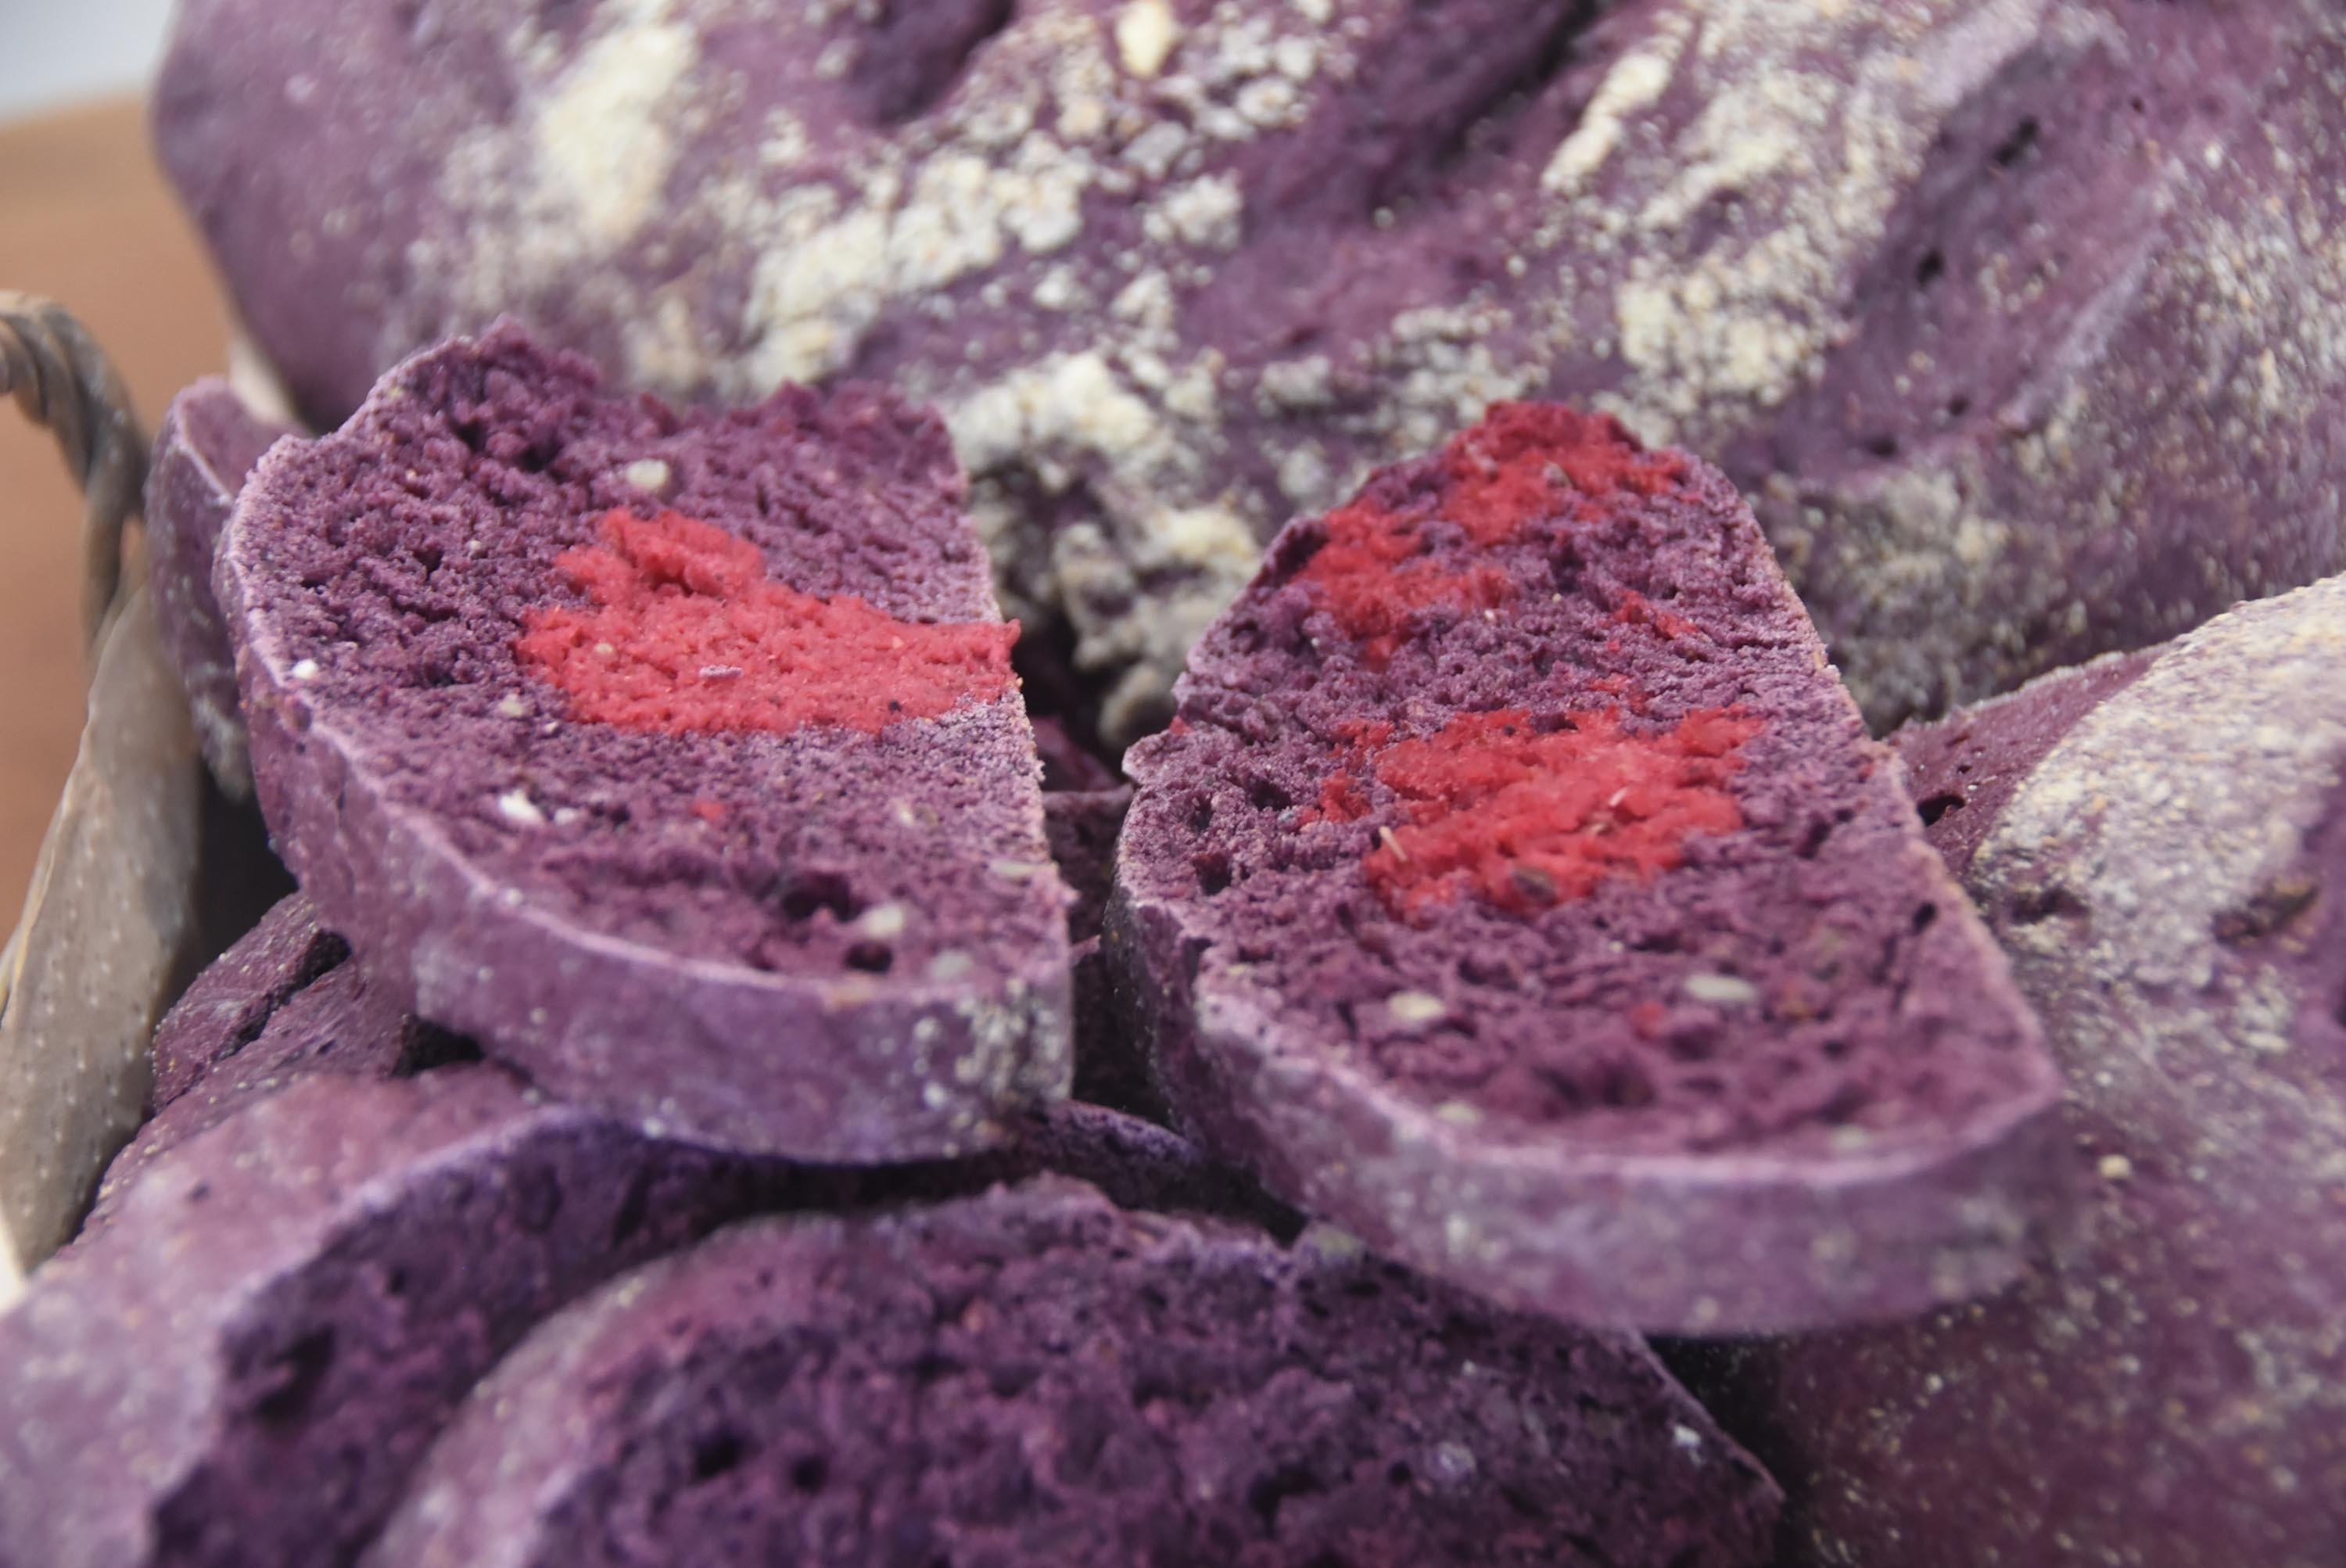 Getting its color from fruits and vegetables, purple bread offers a healthier alternative to white bread. (DHA Photo)